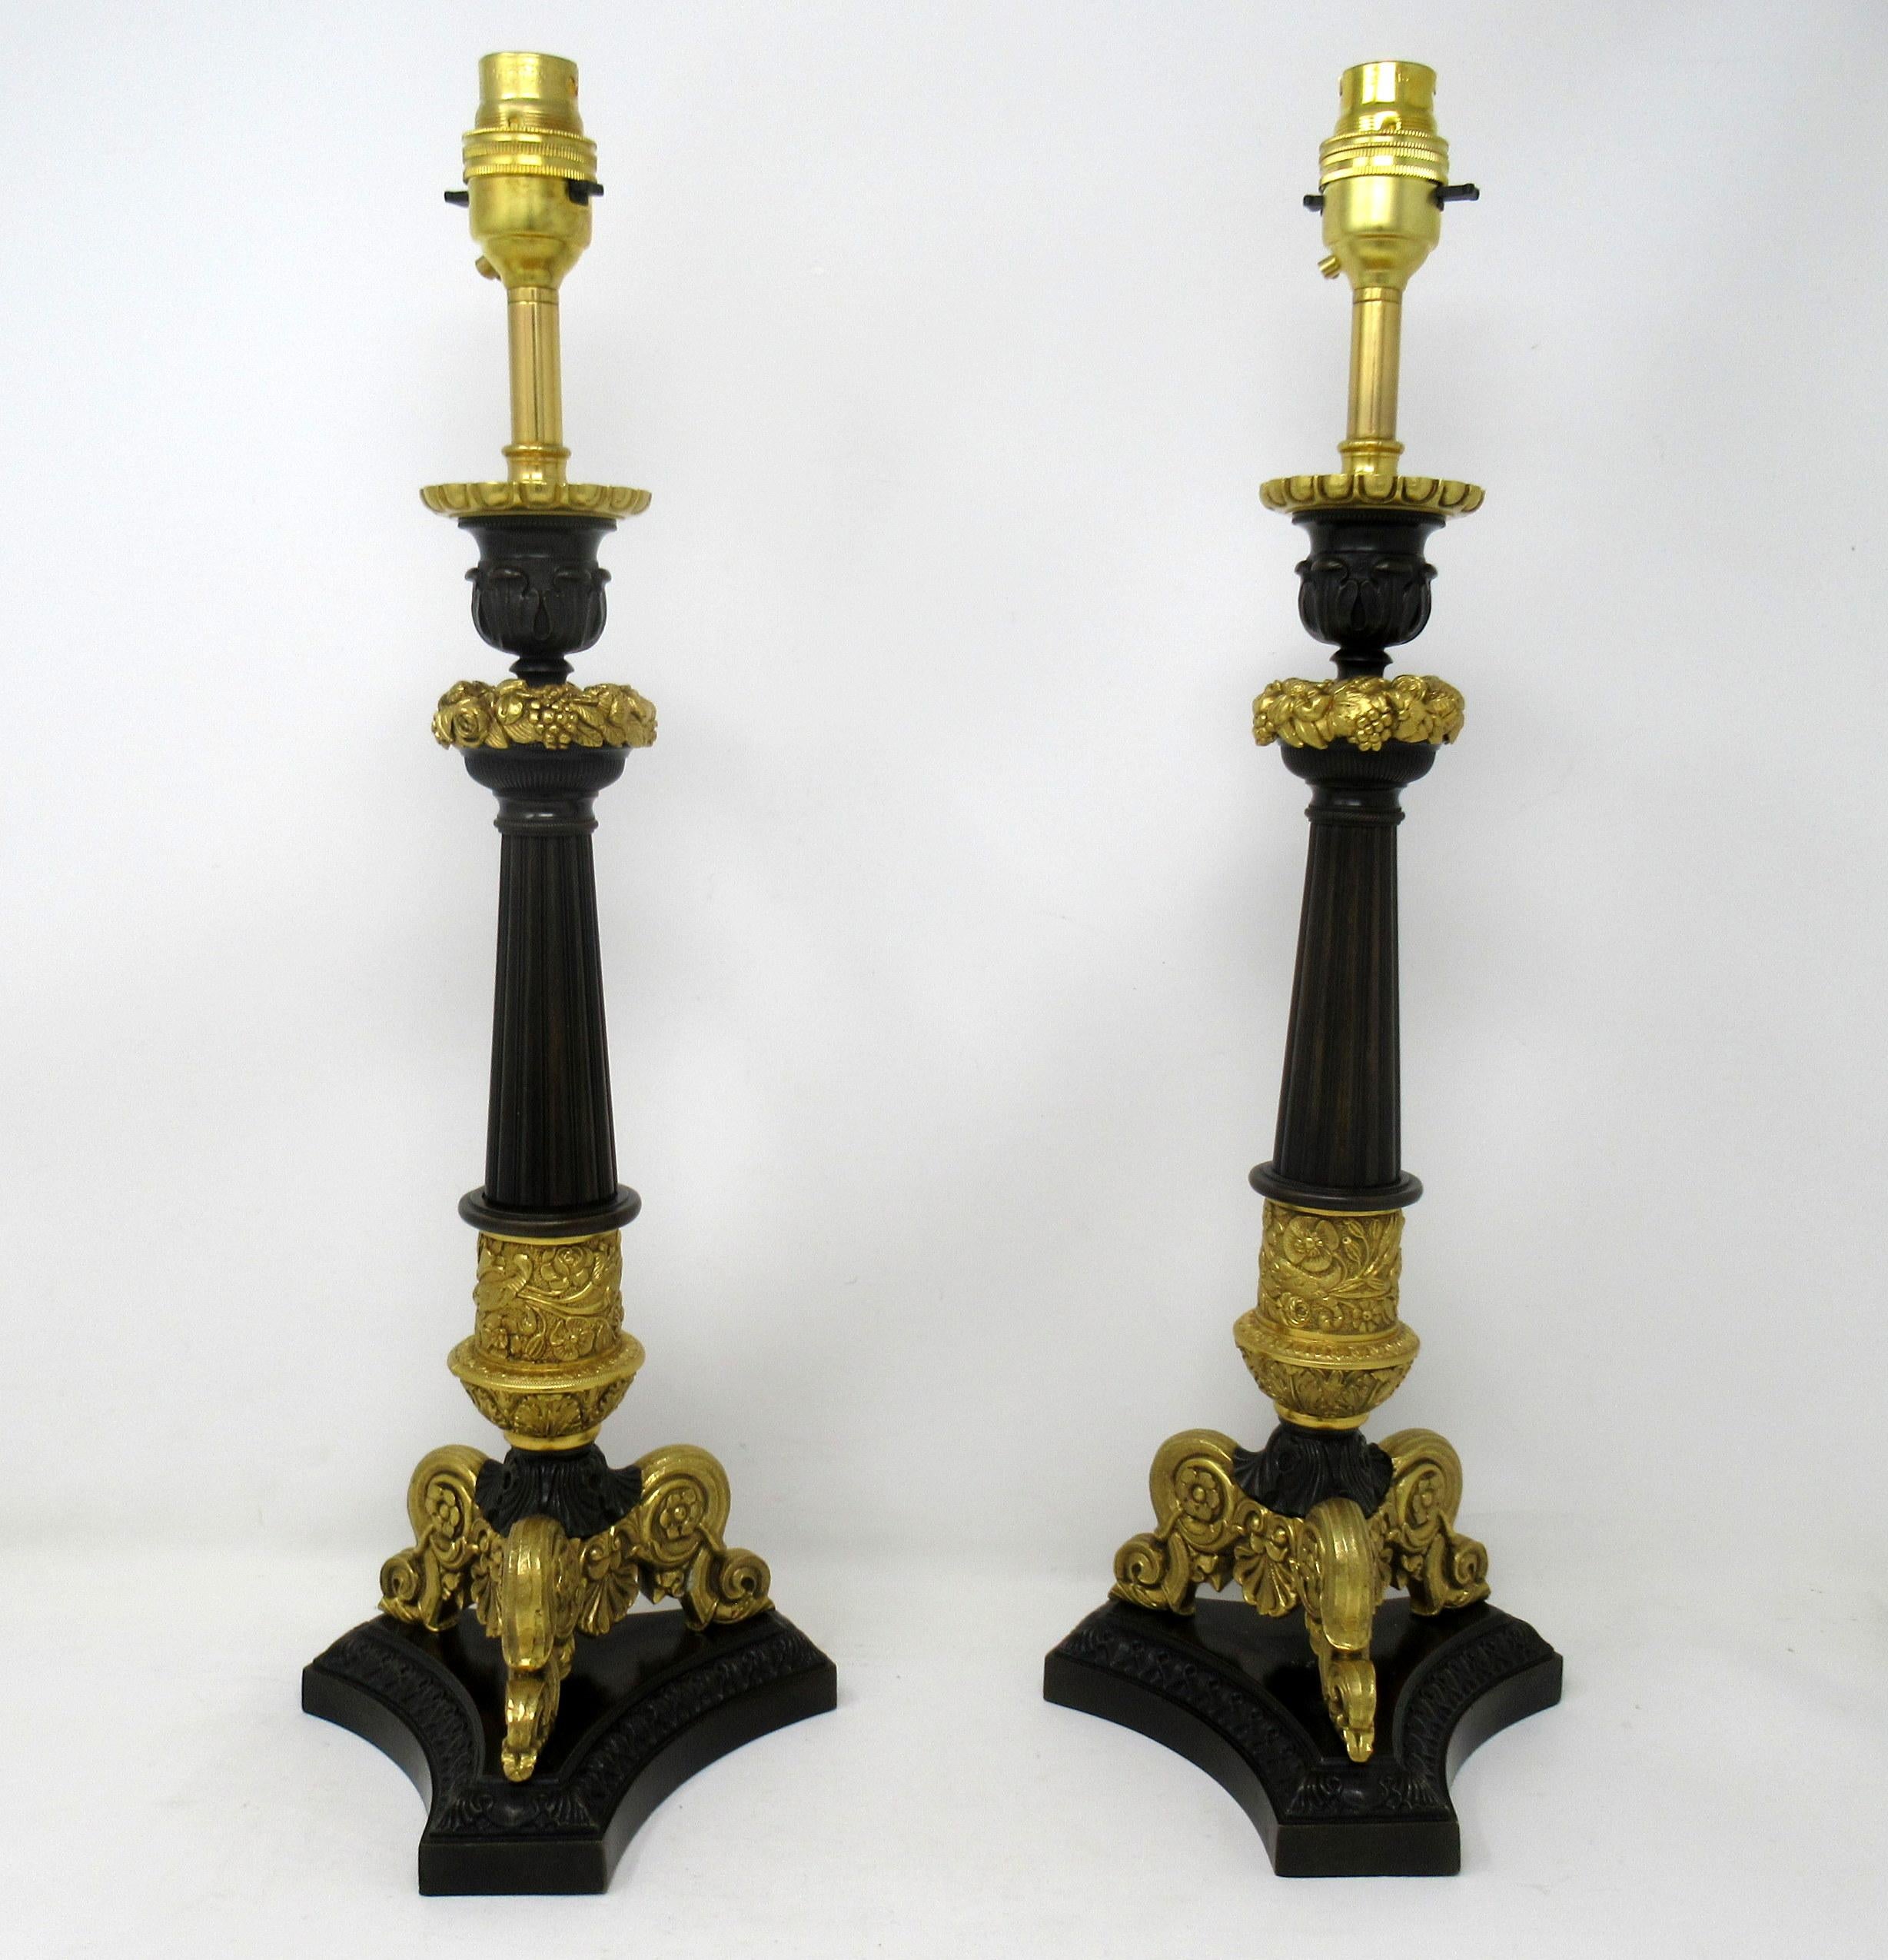 Early Victorian Antique Pair of French Doré Bronze Neoclassical Ormolu Candlestick Lamps